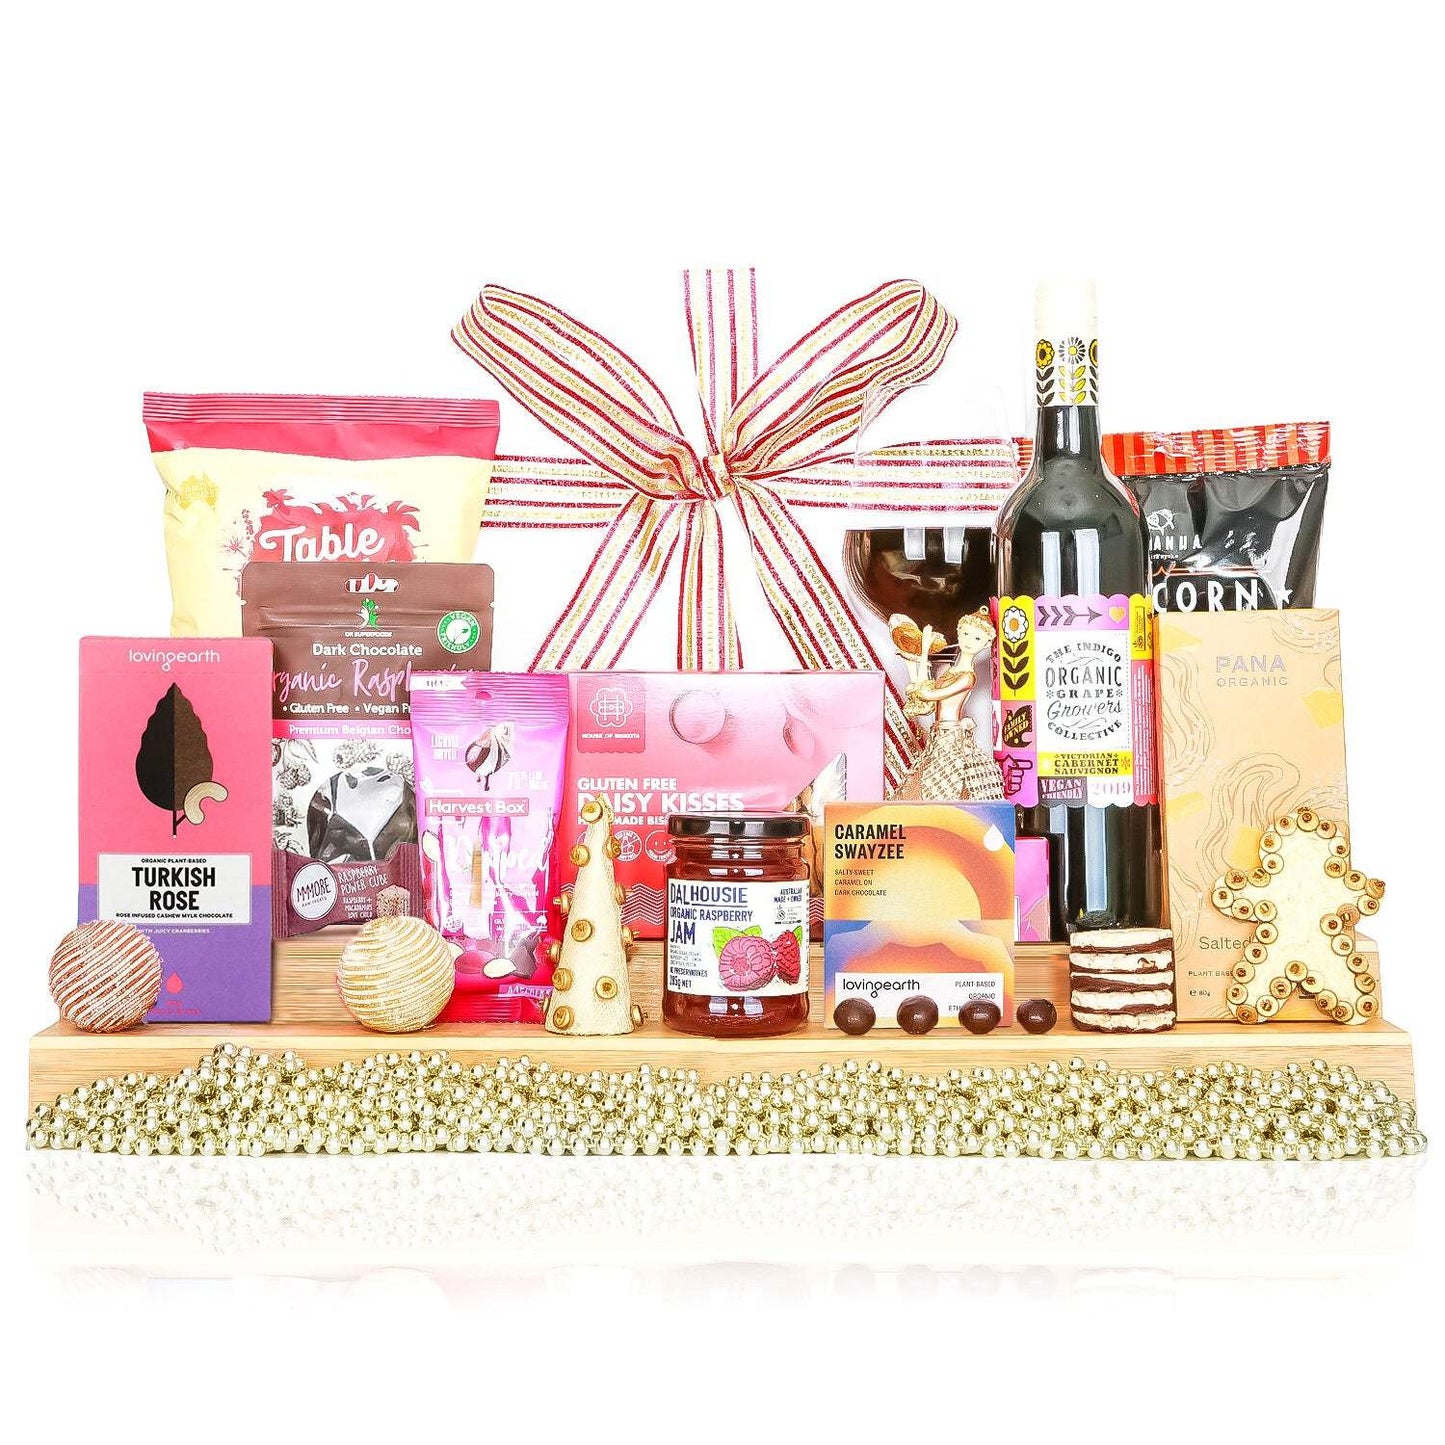 Holiday Joy - Healthy Belly Hampers - pure indulgence - birthday hampers - gift hampers - gift hampers melbourne - gift hampers australia - organic hampers -vegan hampers - gluten free hampers - birthday hampers -anniversary hampers - wedding hampers - alcohol hampers